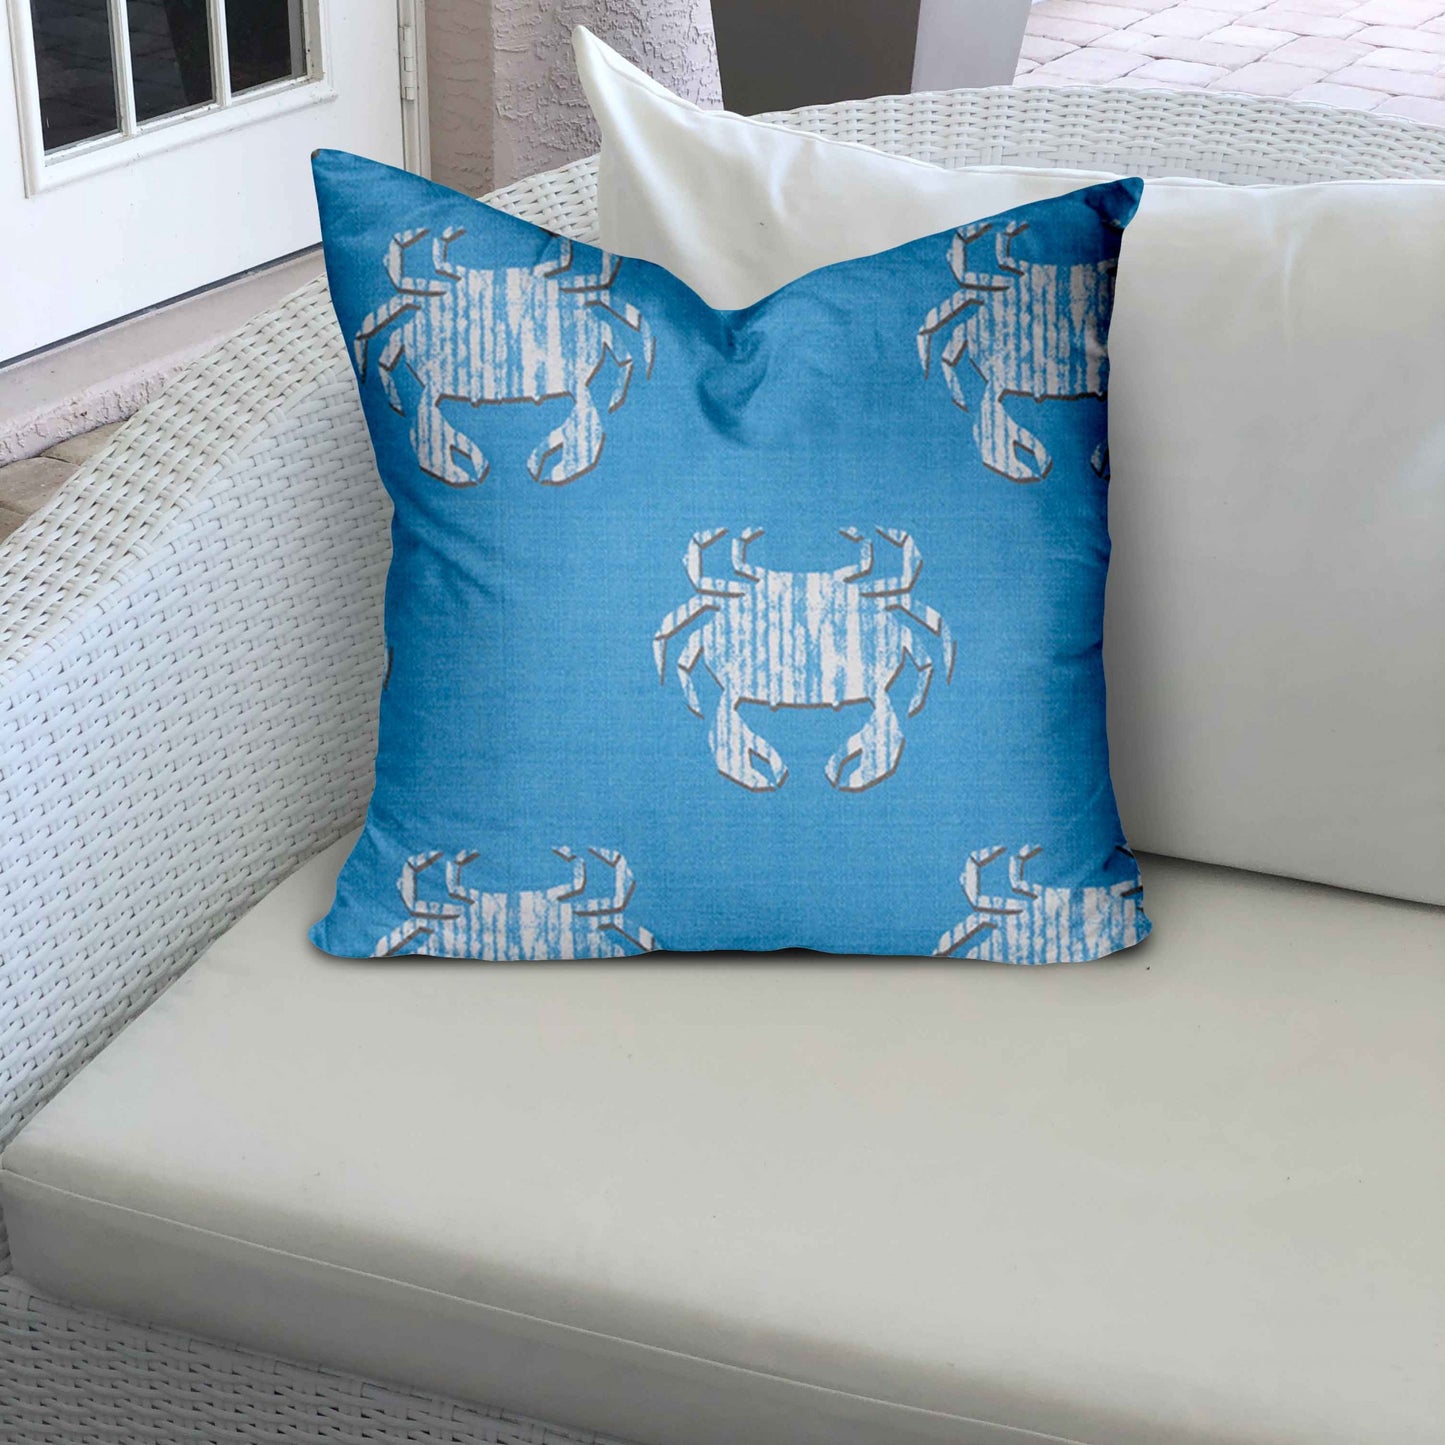 16" X 16" Blue And White Crab Zippered Coastal Throw Indoor Outdoor Pillow